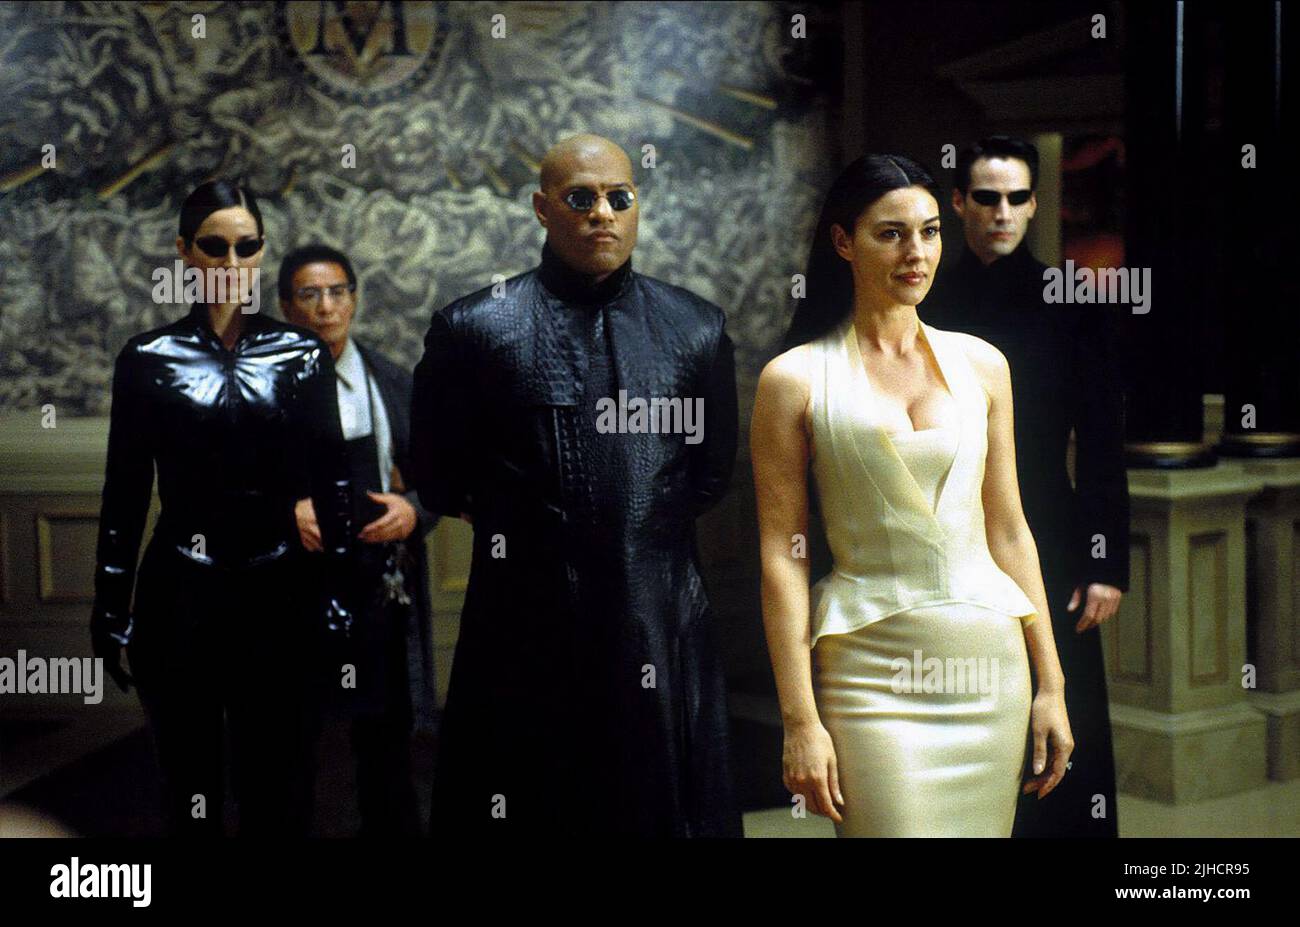 CARRIE-ANNE MOSS,RANDALL DUK-KIM, LAURENCE FISHBURNE, MONICA BELLUCCI, KEANU REEVES, THE MATRIX RELOADED, 2003 Stock Photo